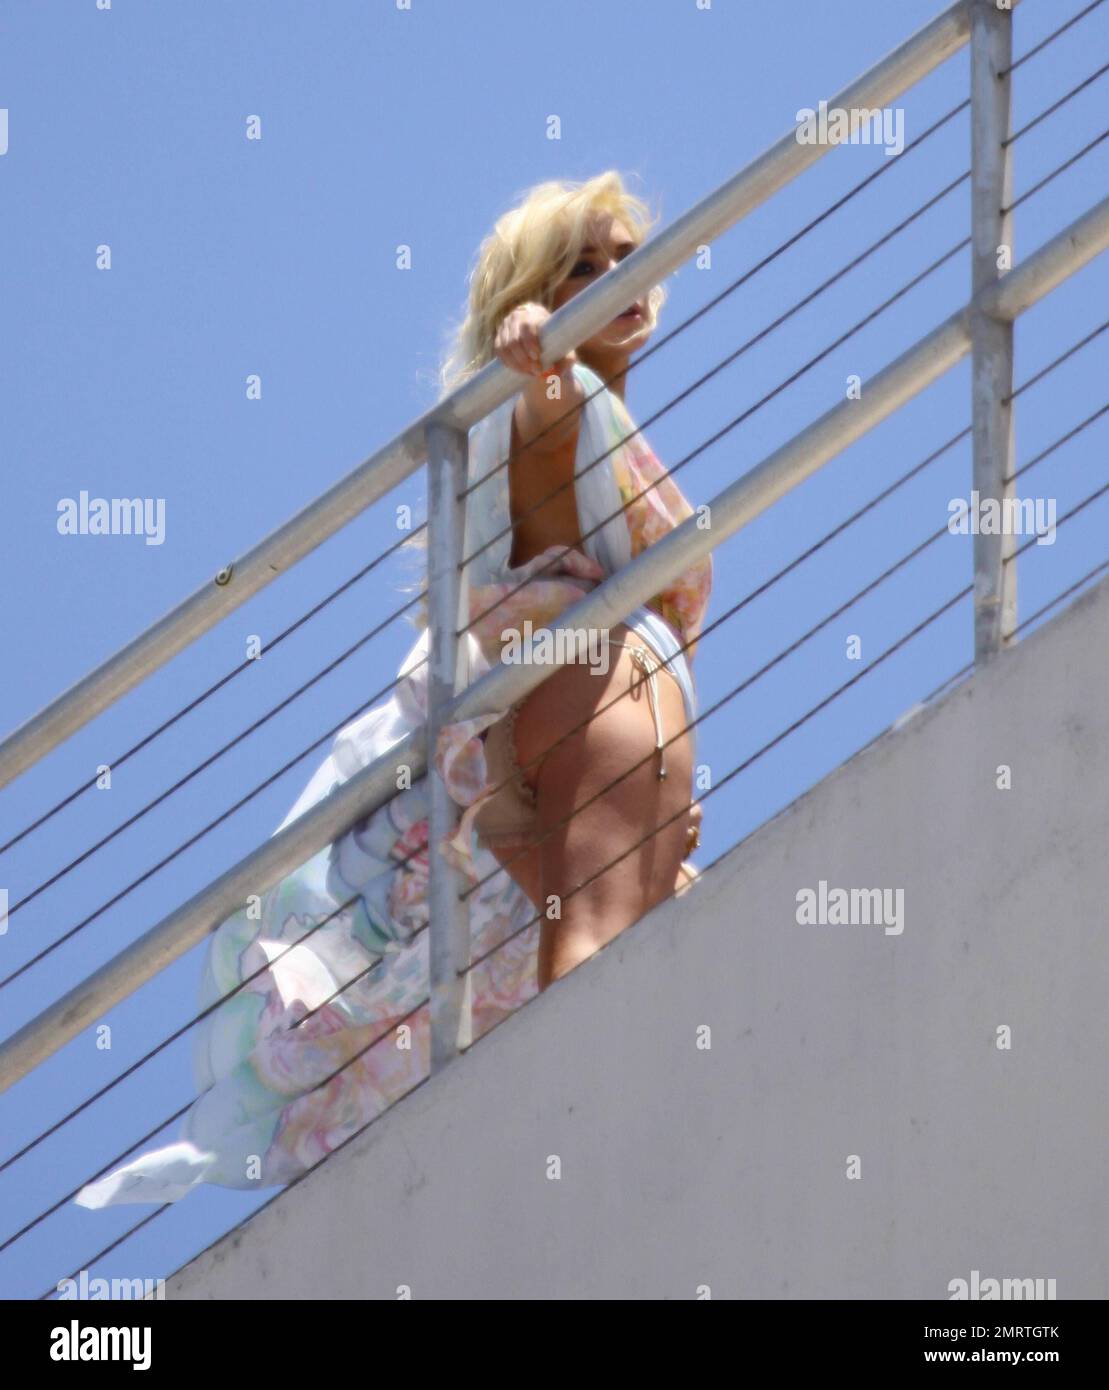 Lindsay Lohan does a Marilyn Monroe-esque photo shoot on the roof of a Miami Beach hotel for Plum TV with her hair and dress blowing up  in the wind, possibly showing more than she intended in a signature Marilyn pose. Lohan's shoot is to go alongside an interview for the show that is due to come out on June 15th, the day before reports say Lohan will have to surrender to authorities.  Miami Beach, FL 5/21/11 Stock Photo